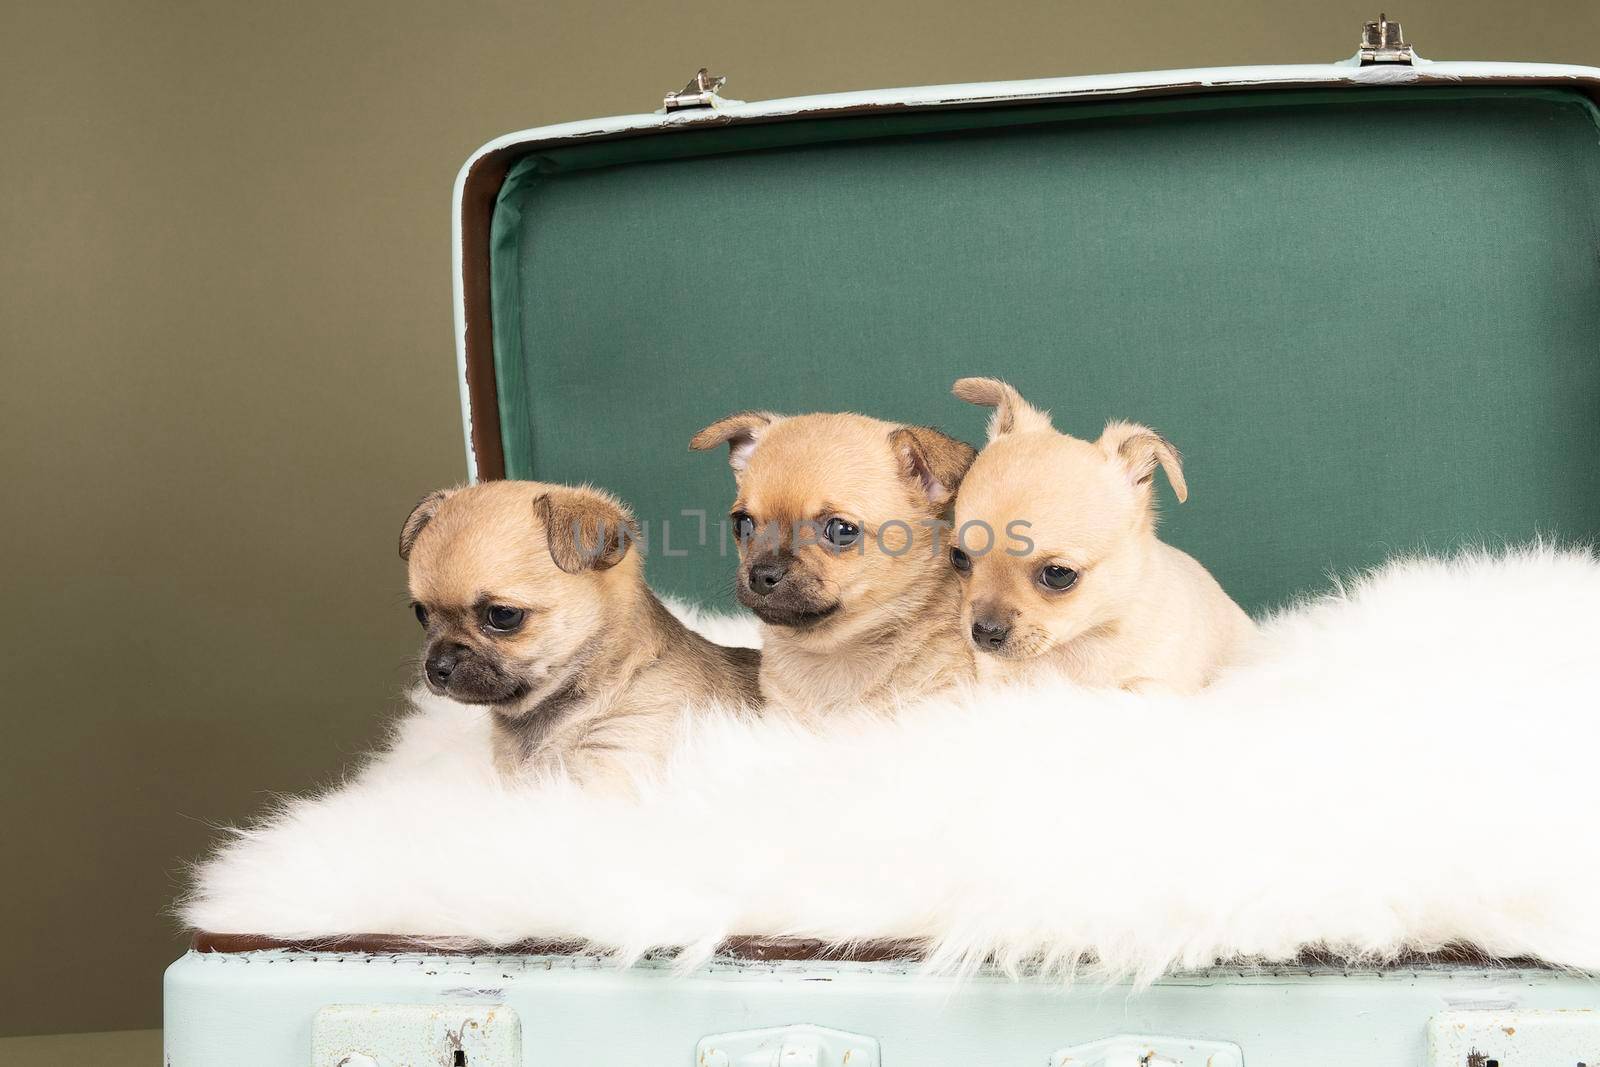 Three cute little Chihuahua puppies side to side on a white fur in a green suitcase with a green background